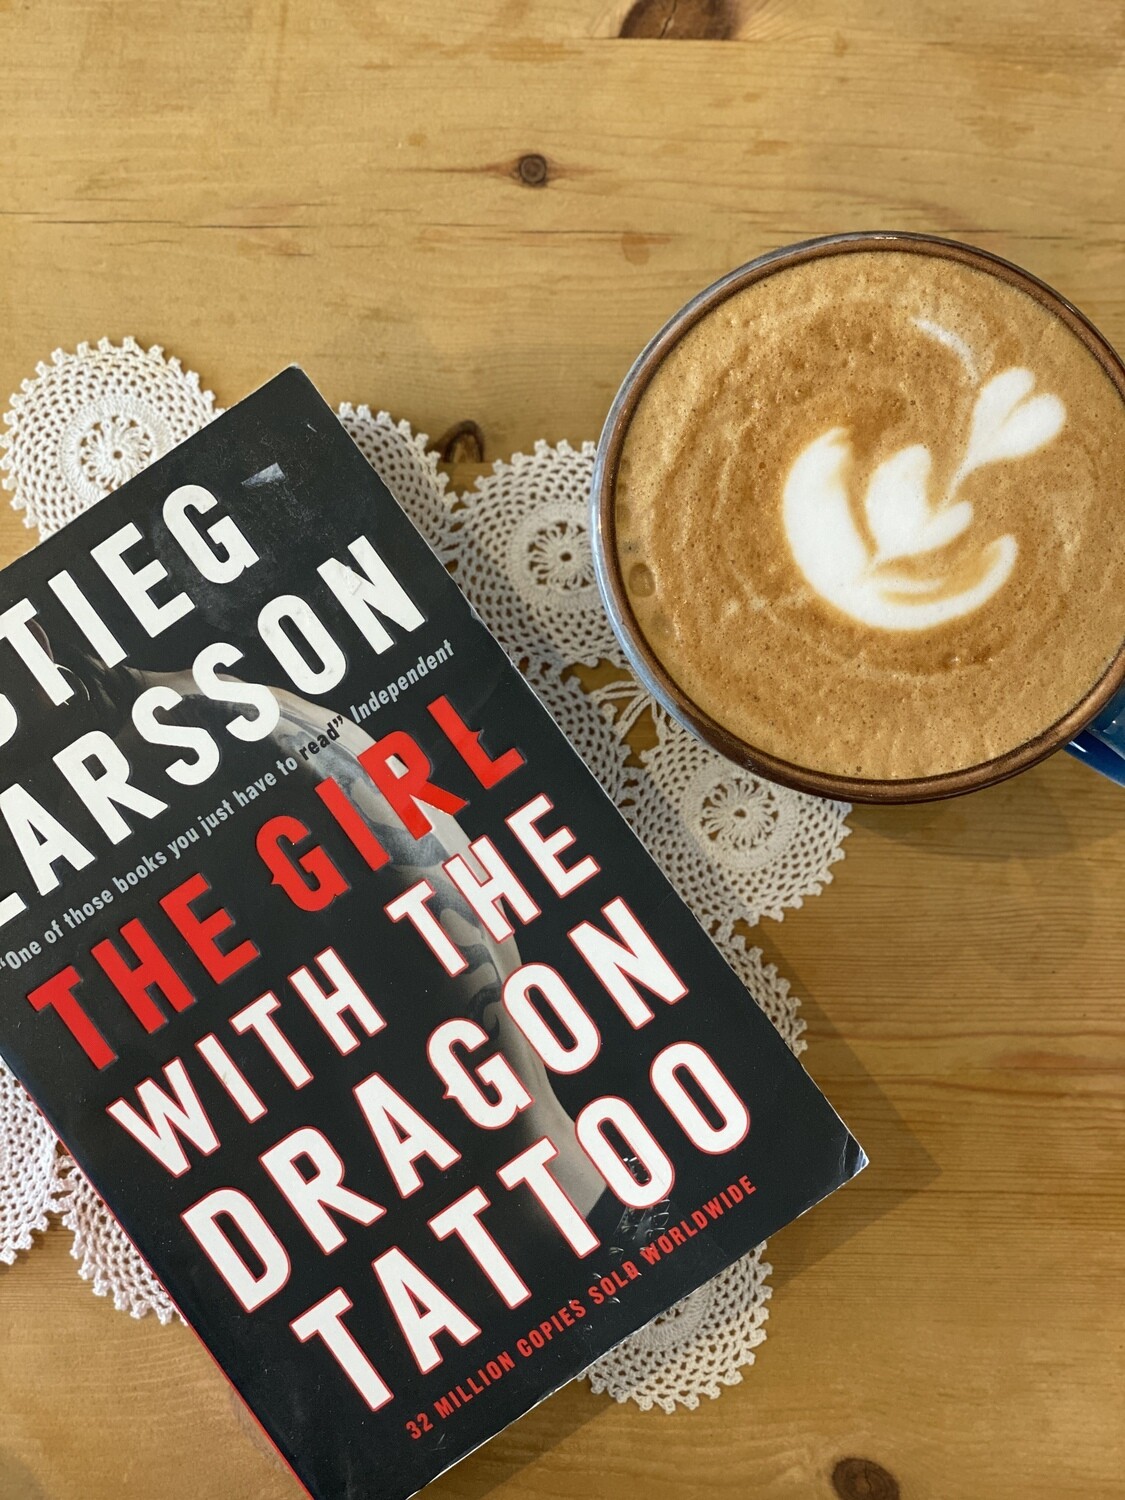 The Girl with the Dragon Tattoo by Stied Larsson